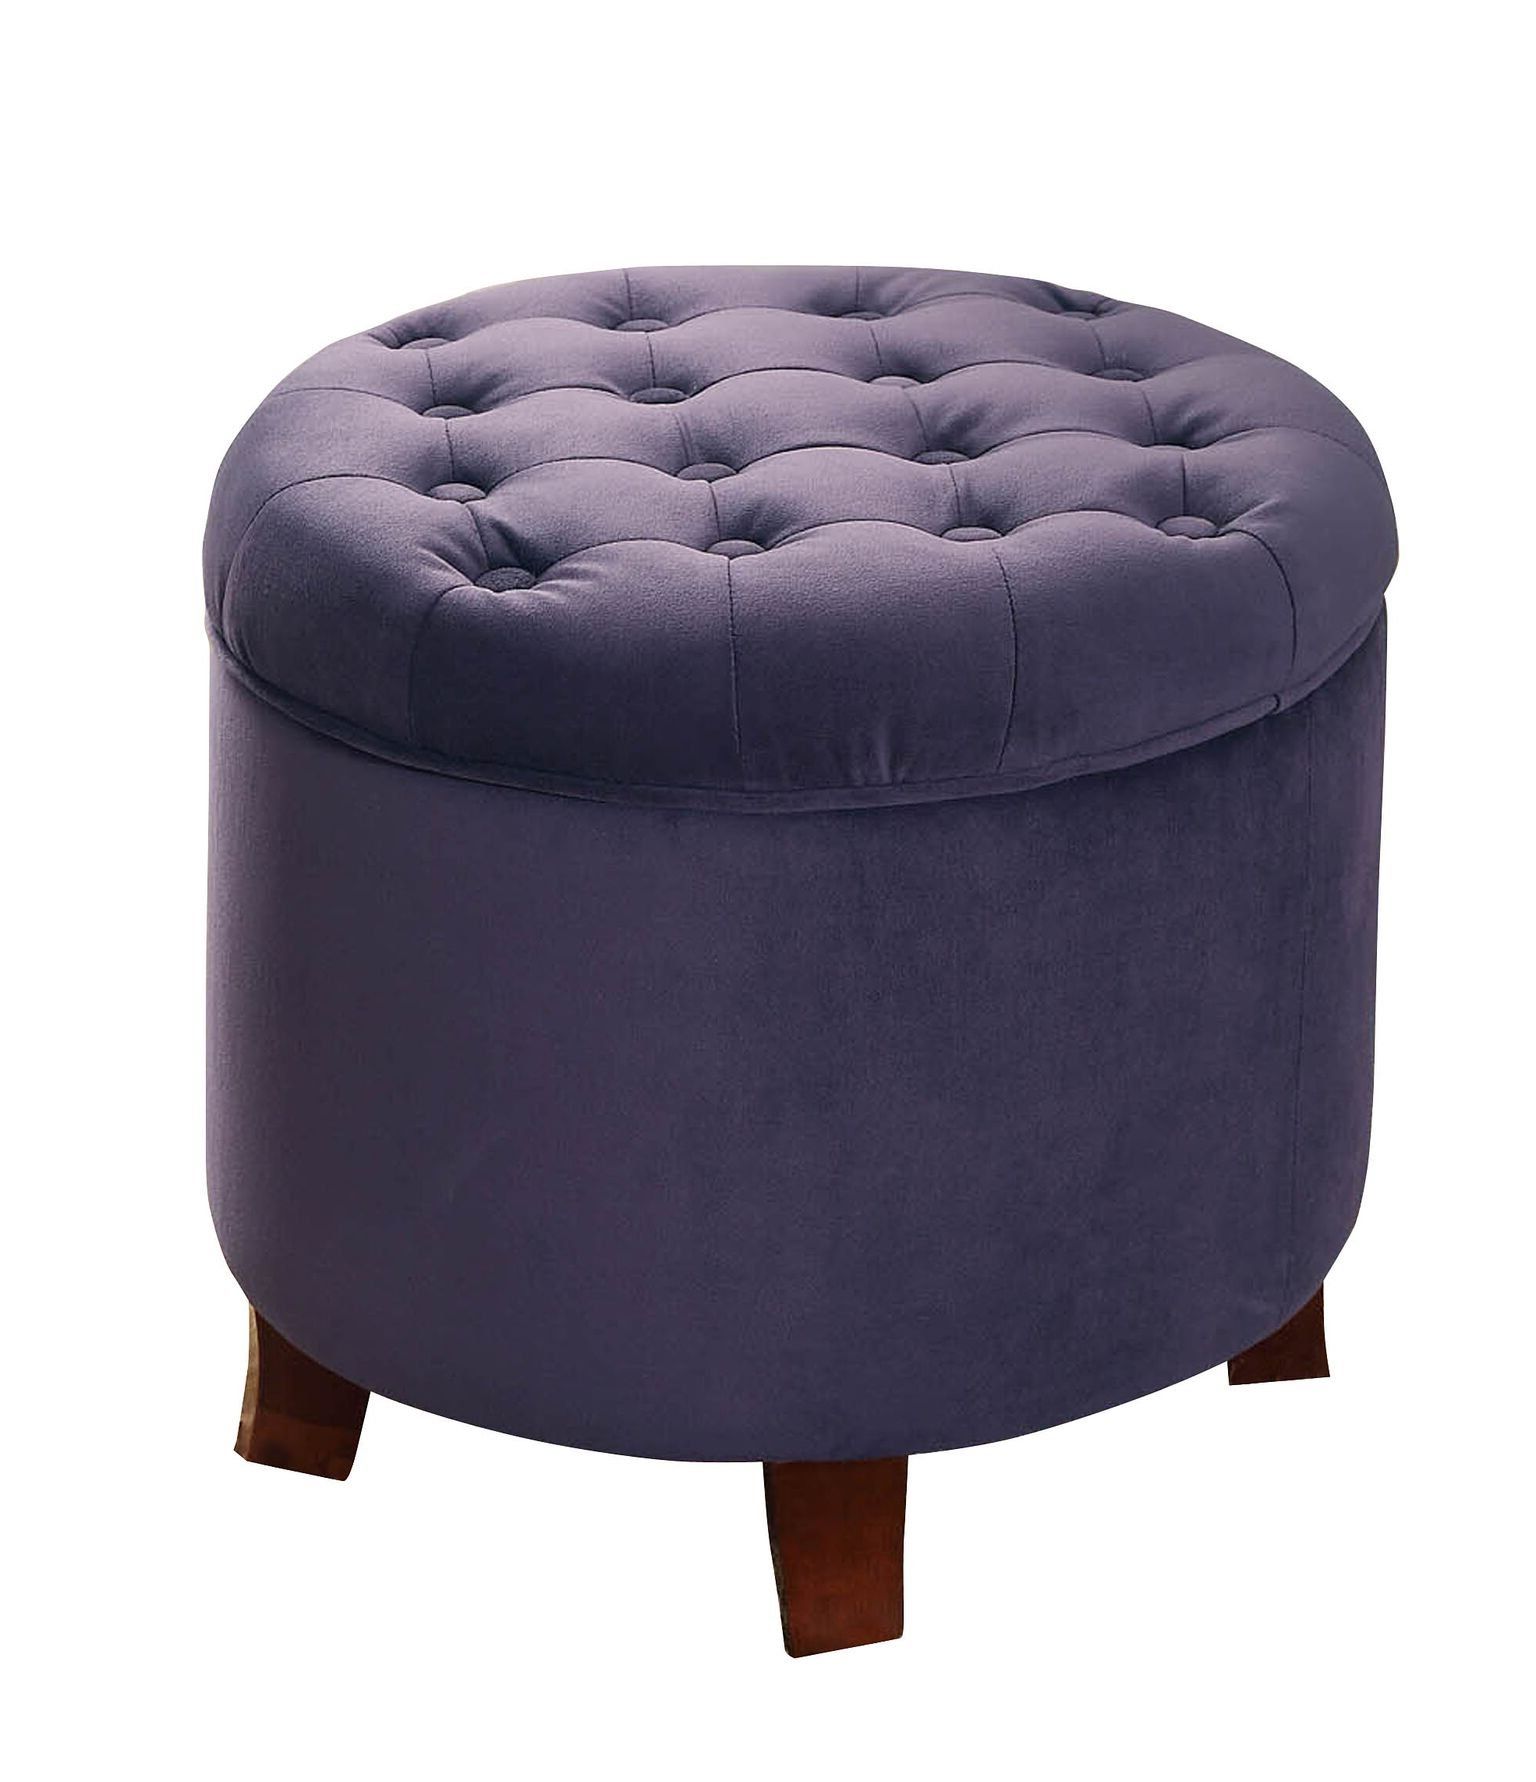 Most Recent Homepop Velvet Tufted Round Storage Ottoman With Removable Lid, Purple Throughout Cream Fabric Tufted Round Storage Ottomans (View 9 of 10)